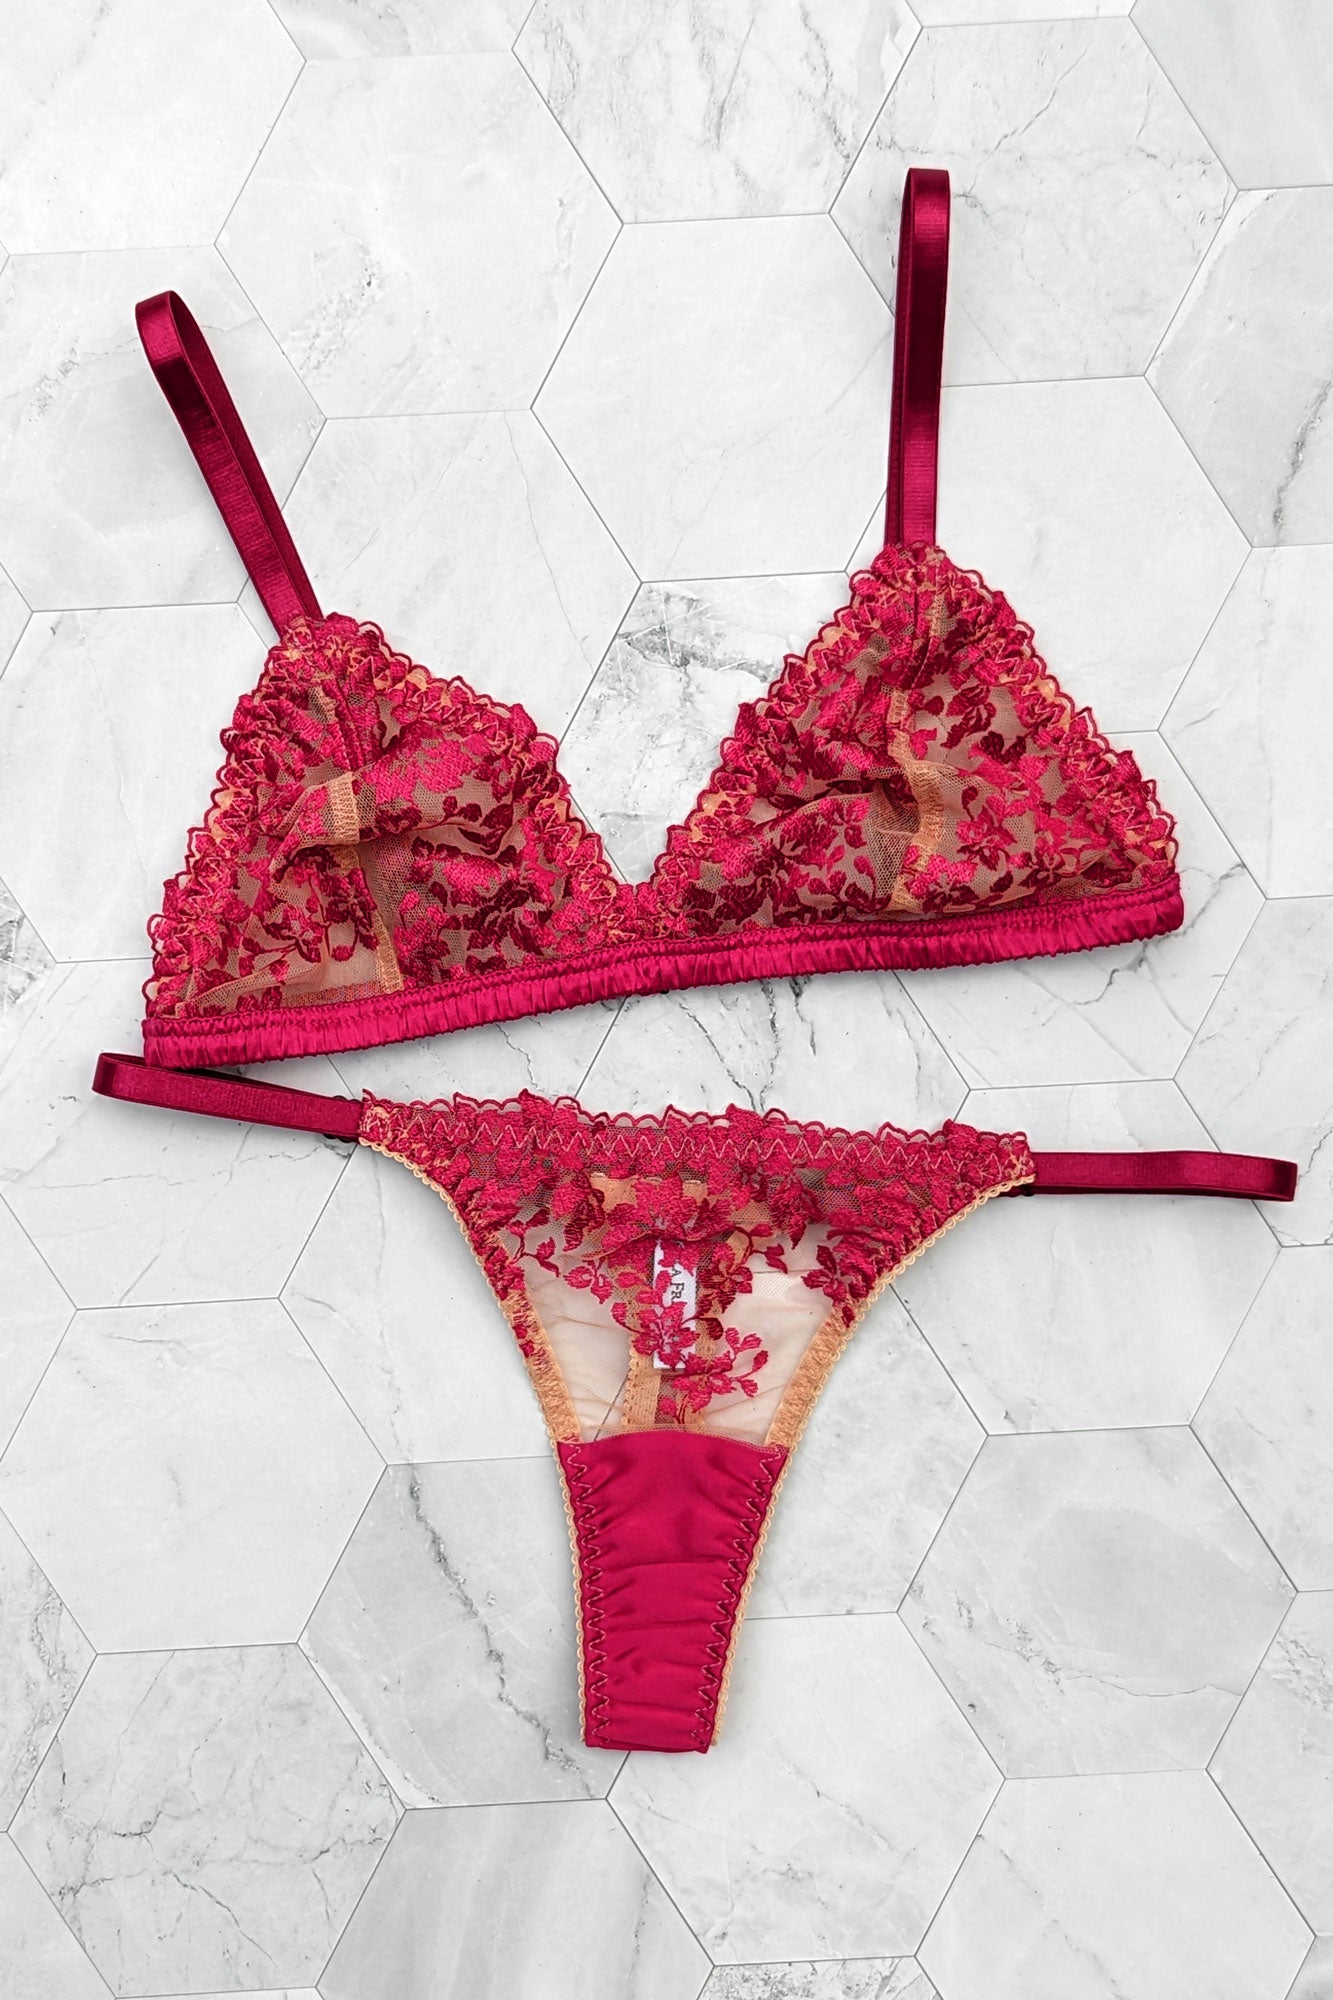 Red, Briefs & Knickers - Shop lingerie trends online